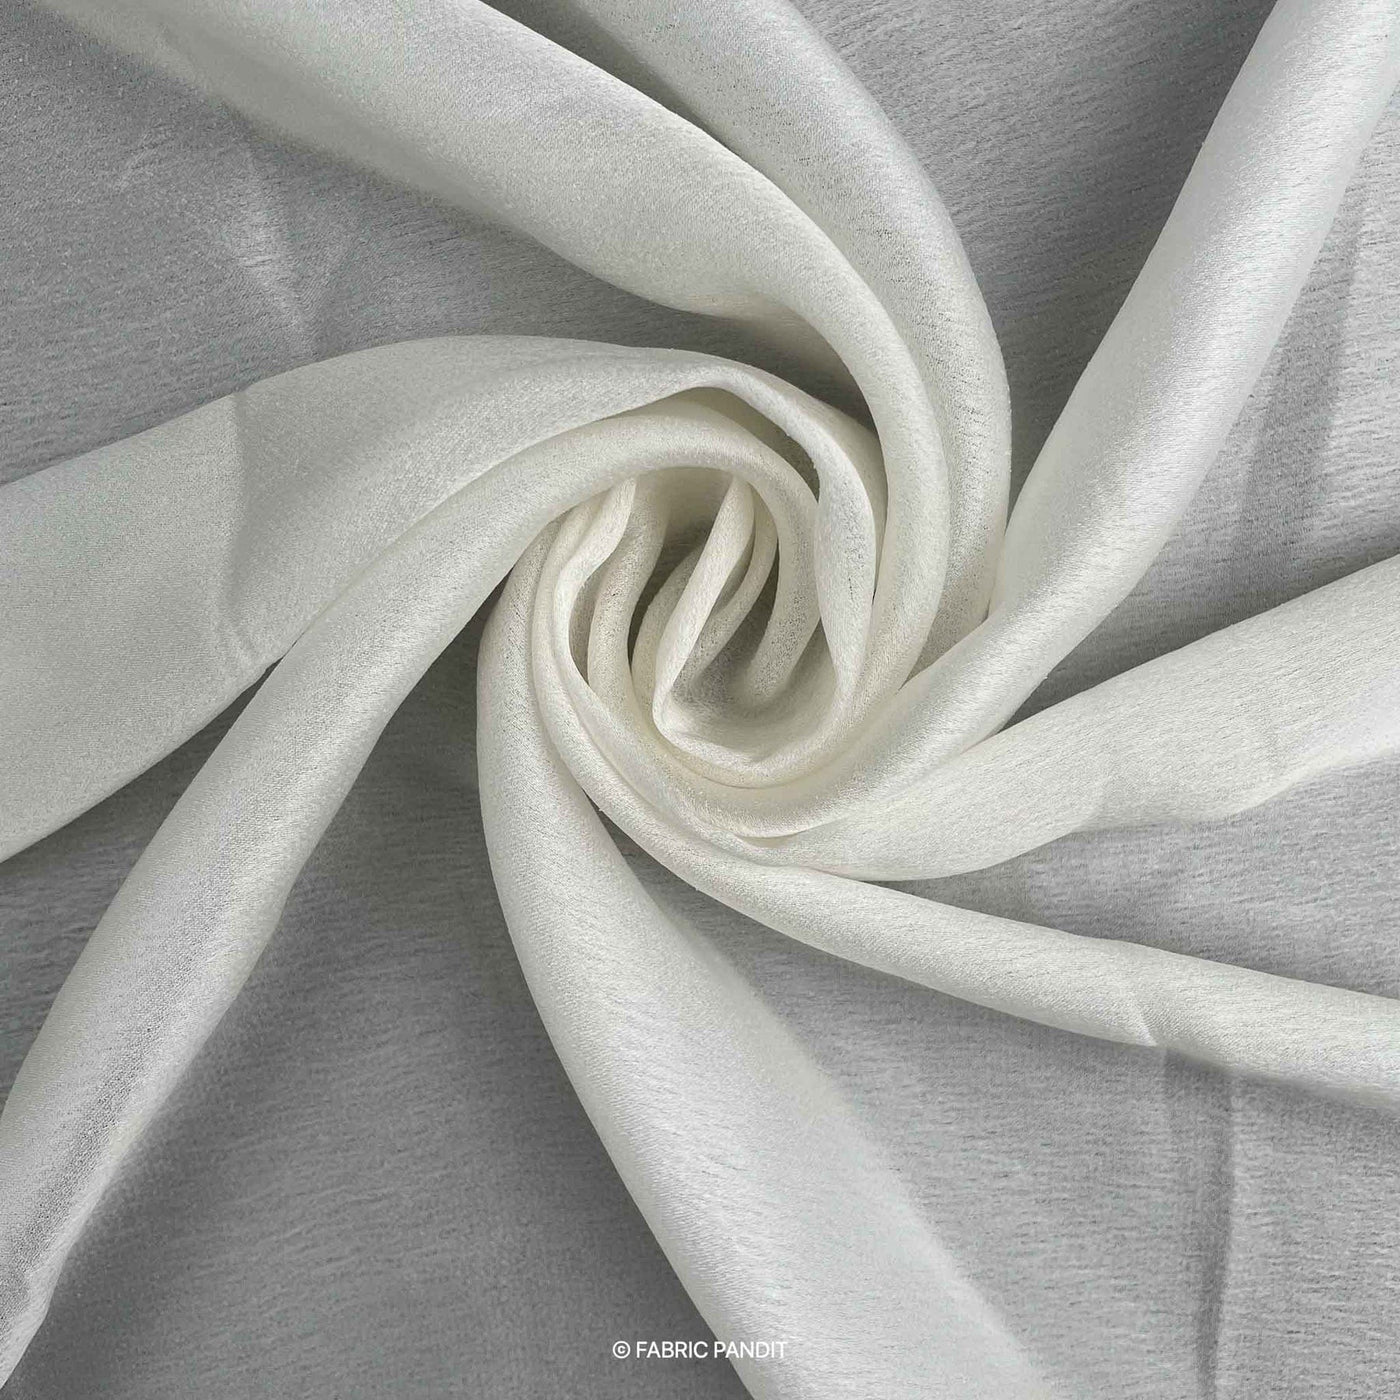 Fabric Pandit Fabric White Dyeable Pure Satin Georgette Plain Fabric (Width 44 inches, 133 Gms)